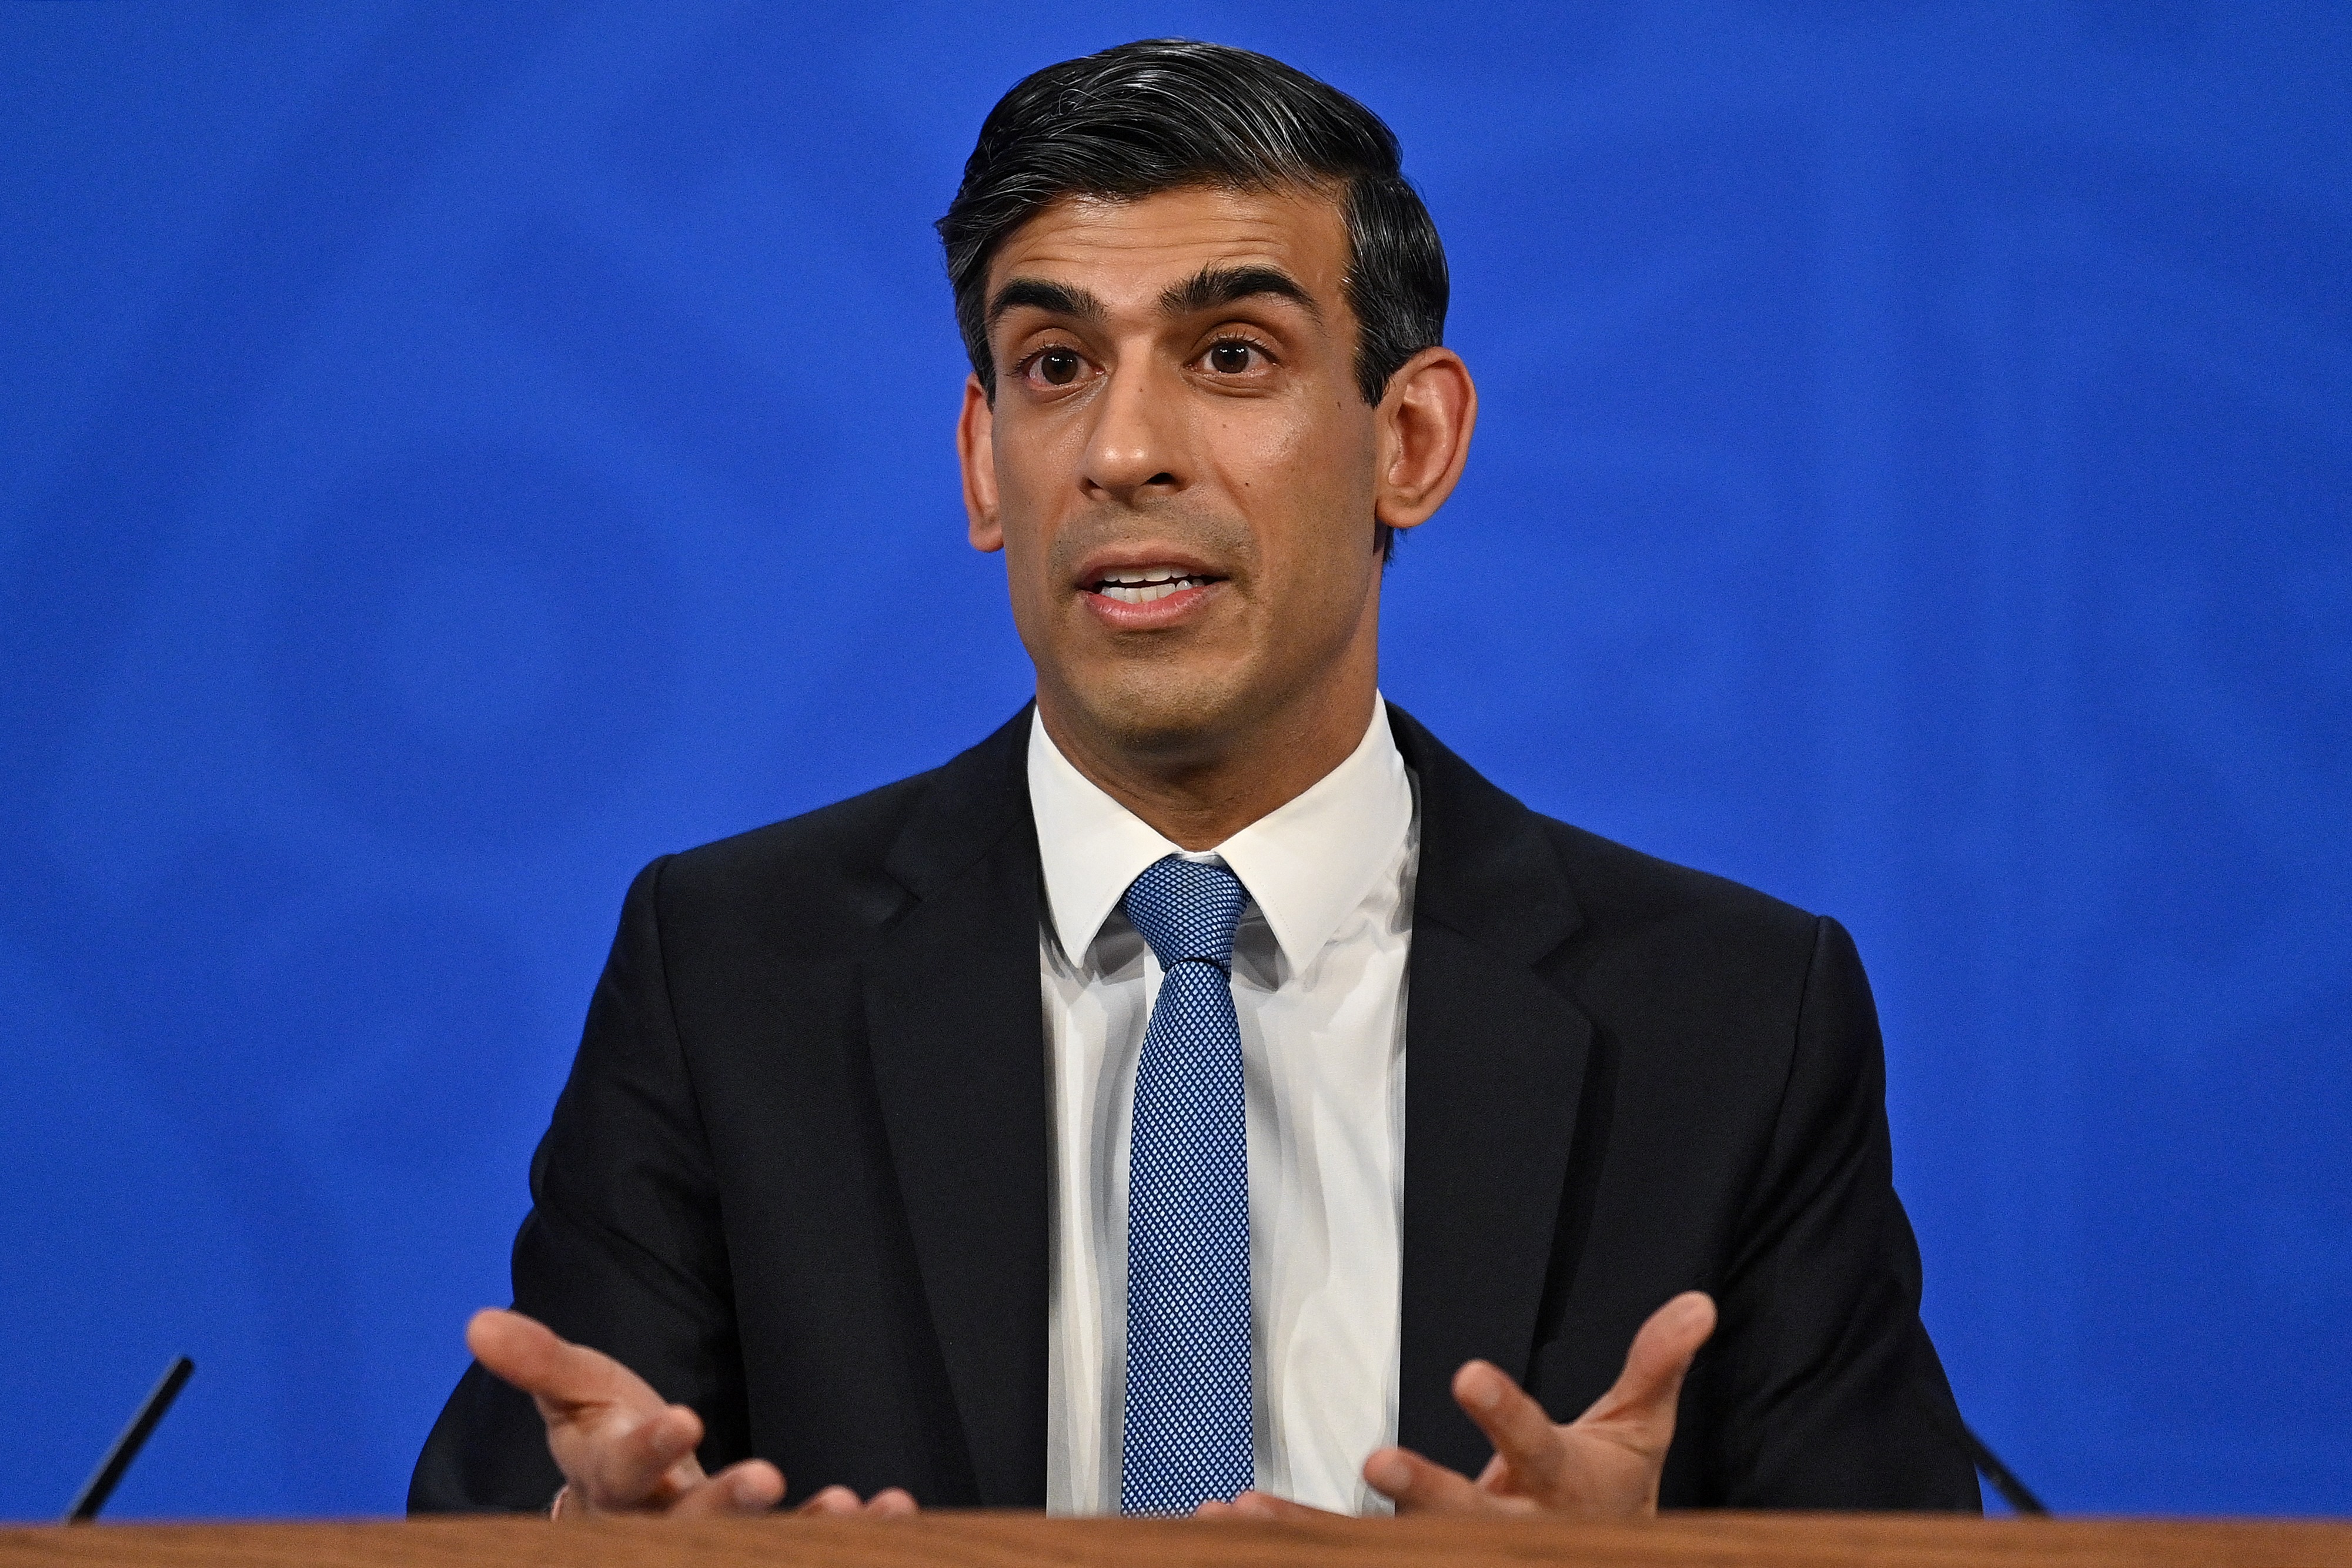 Britain's Chancellor of the Exchequer Rishi Sunak hosts a press conference in the Downing Street briefing room on February 3 in London, England.